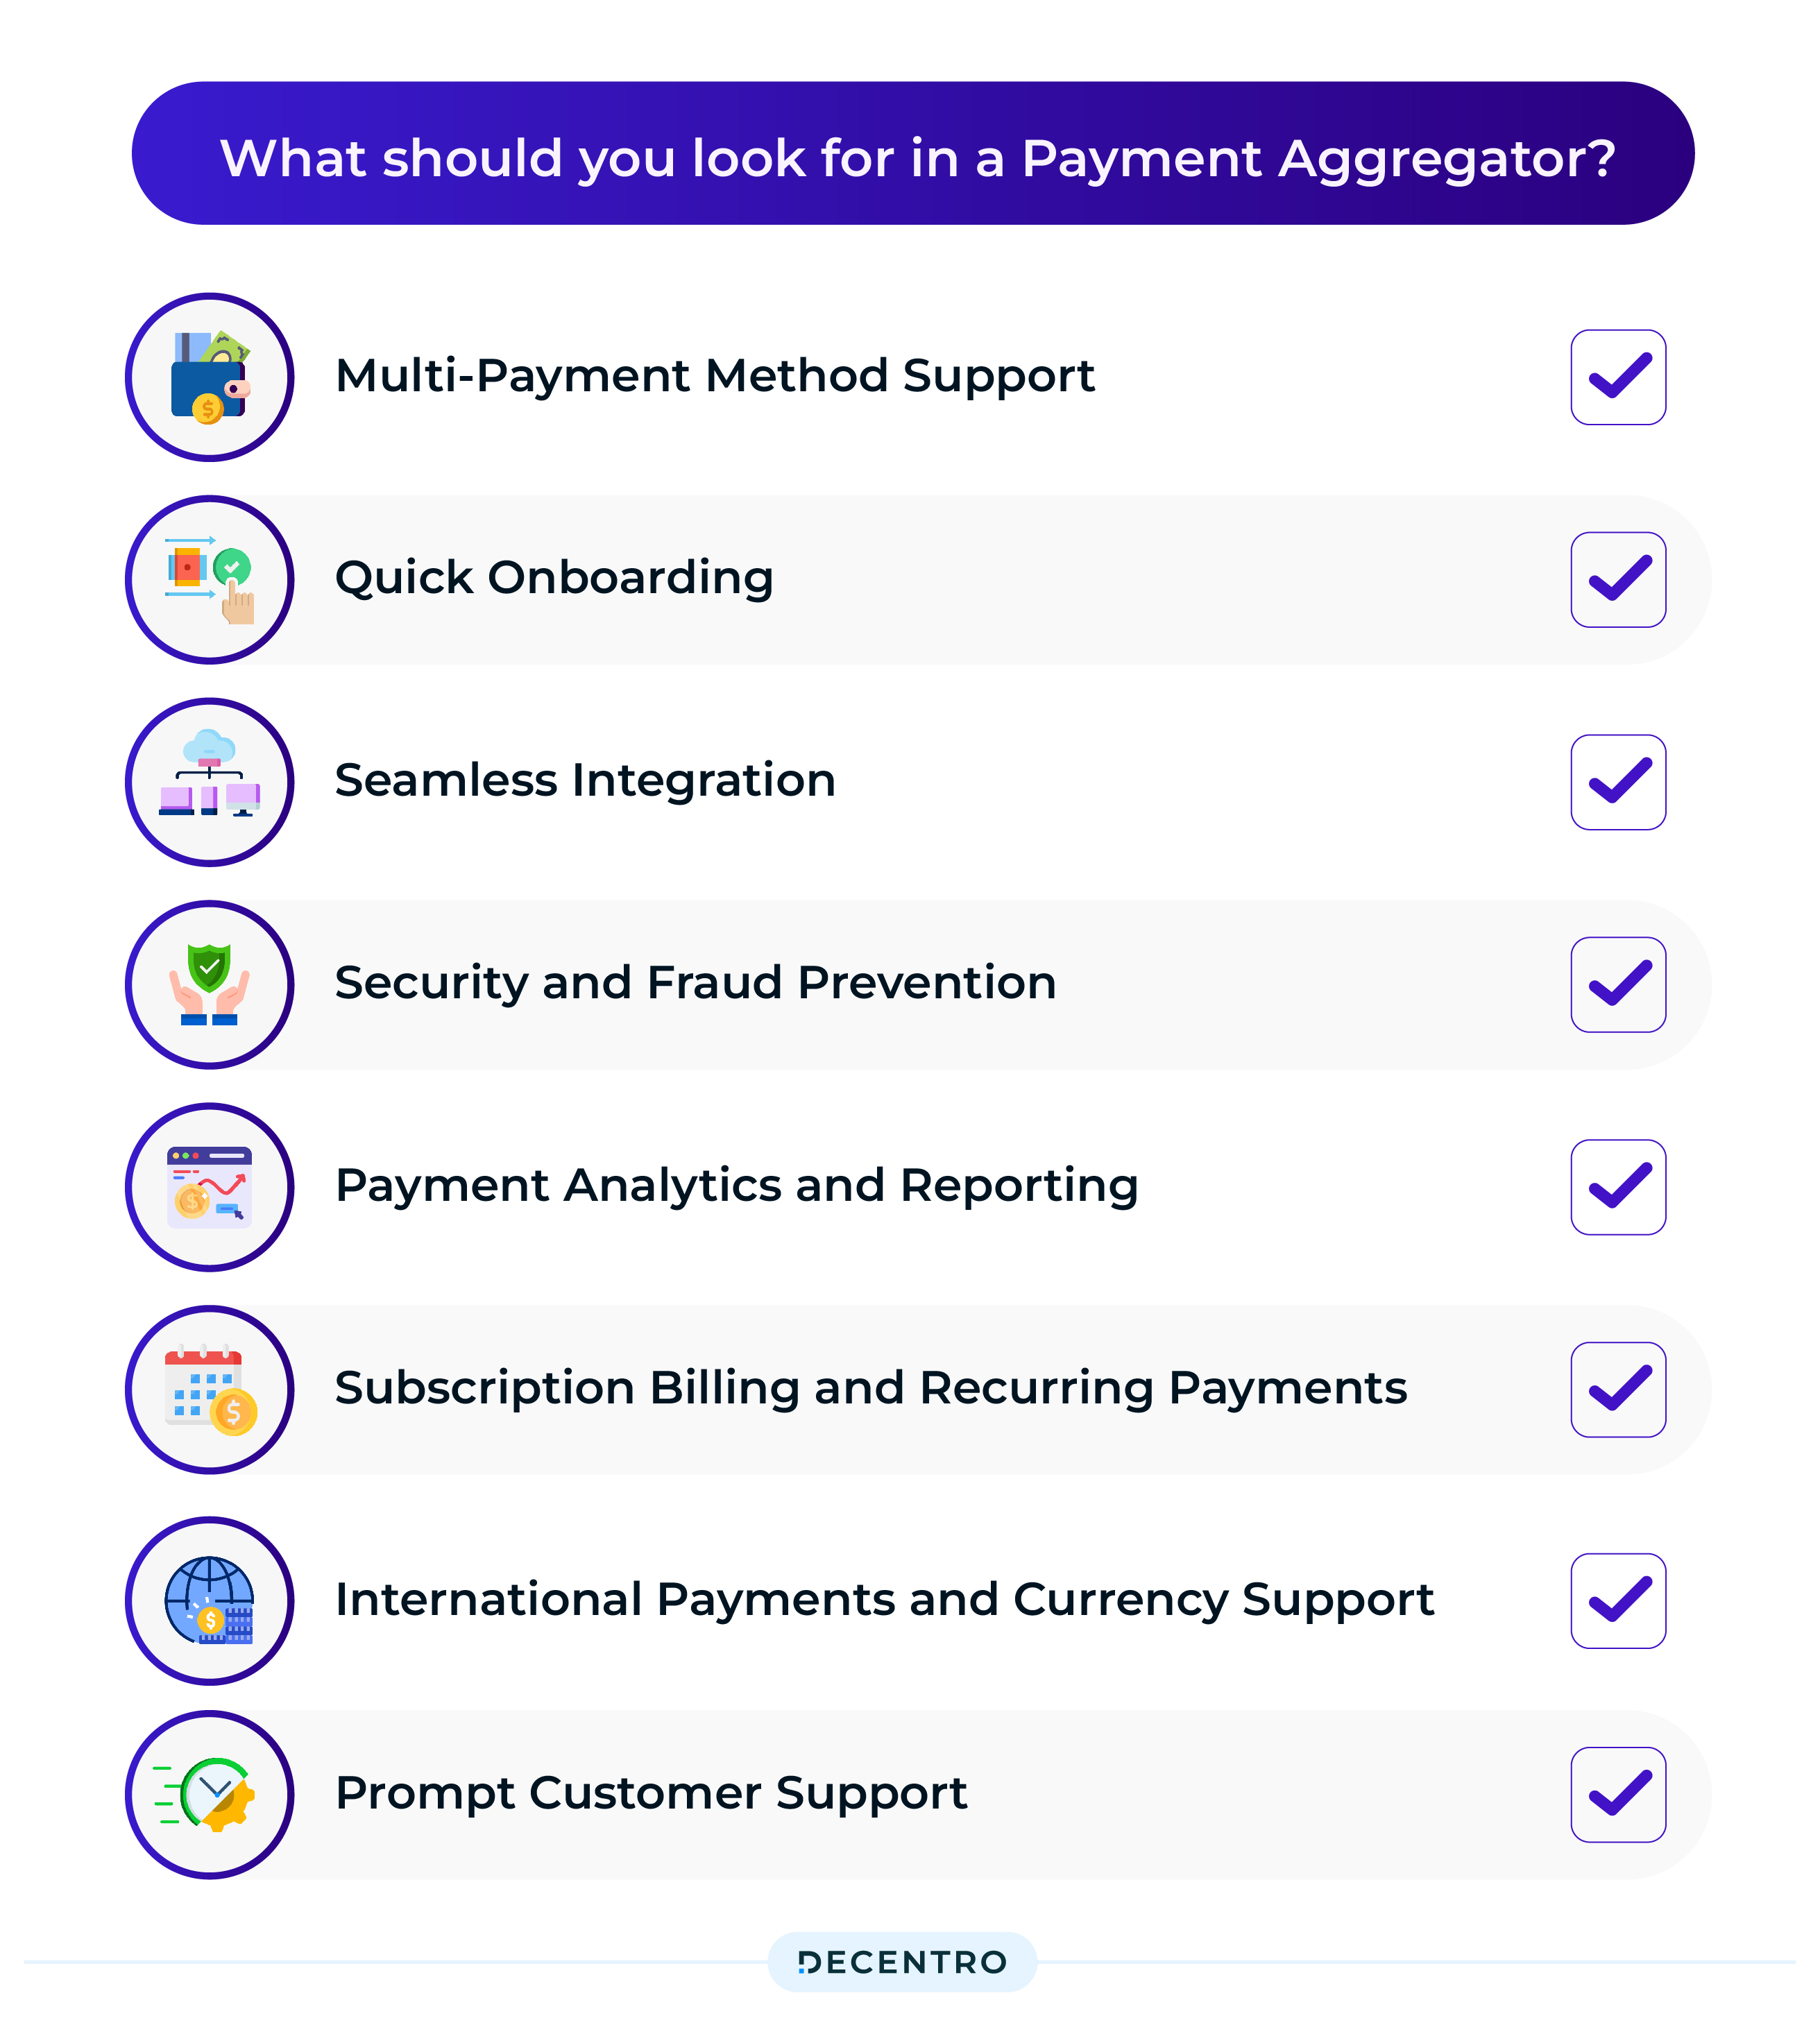 What should you look for in a Payment Aggregator?